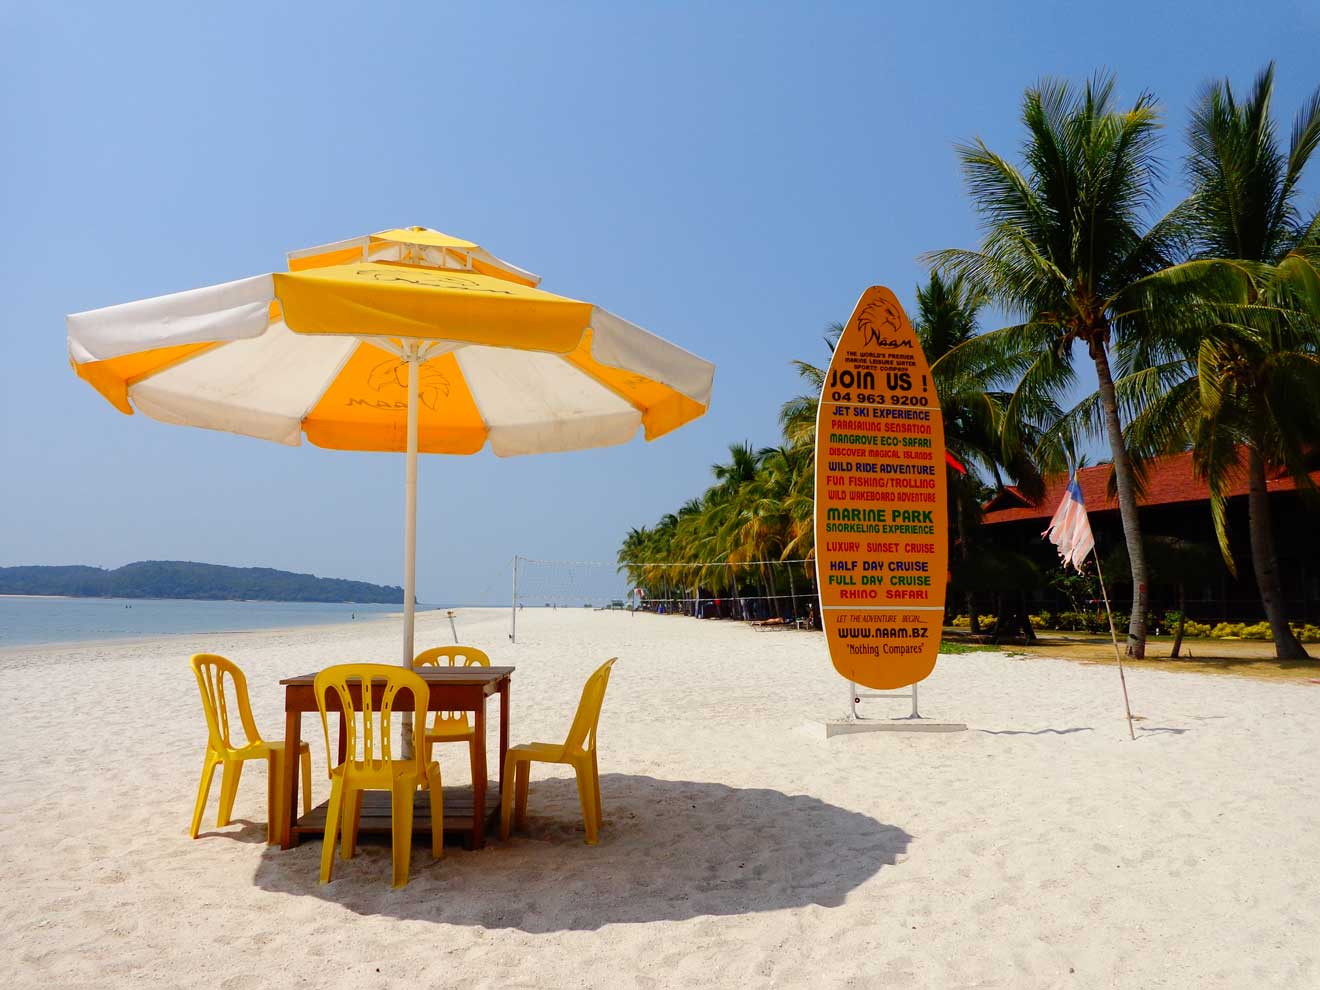 A sunlit beach scene in Langkawi with a large orange and white umbrella, wooden chairs, and a signpost advertising various marine activities